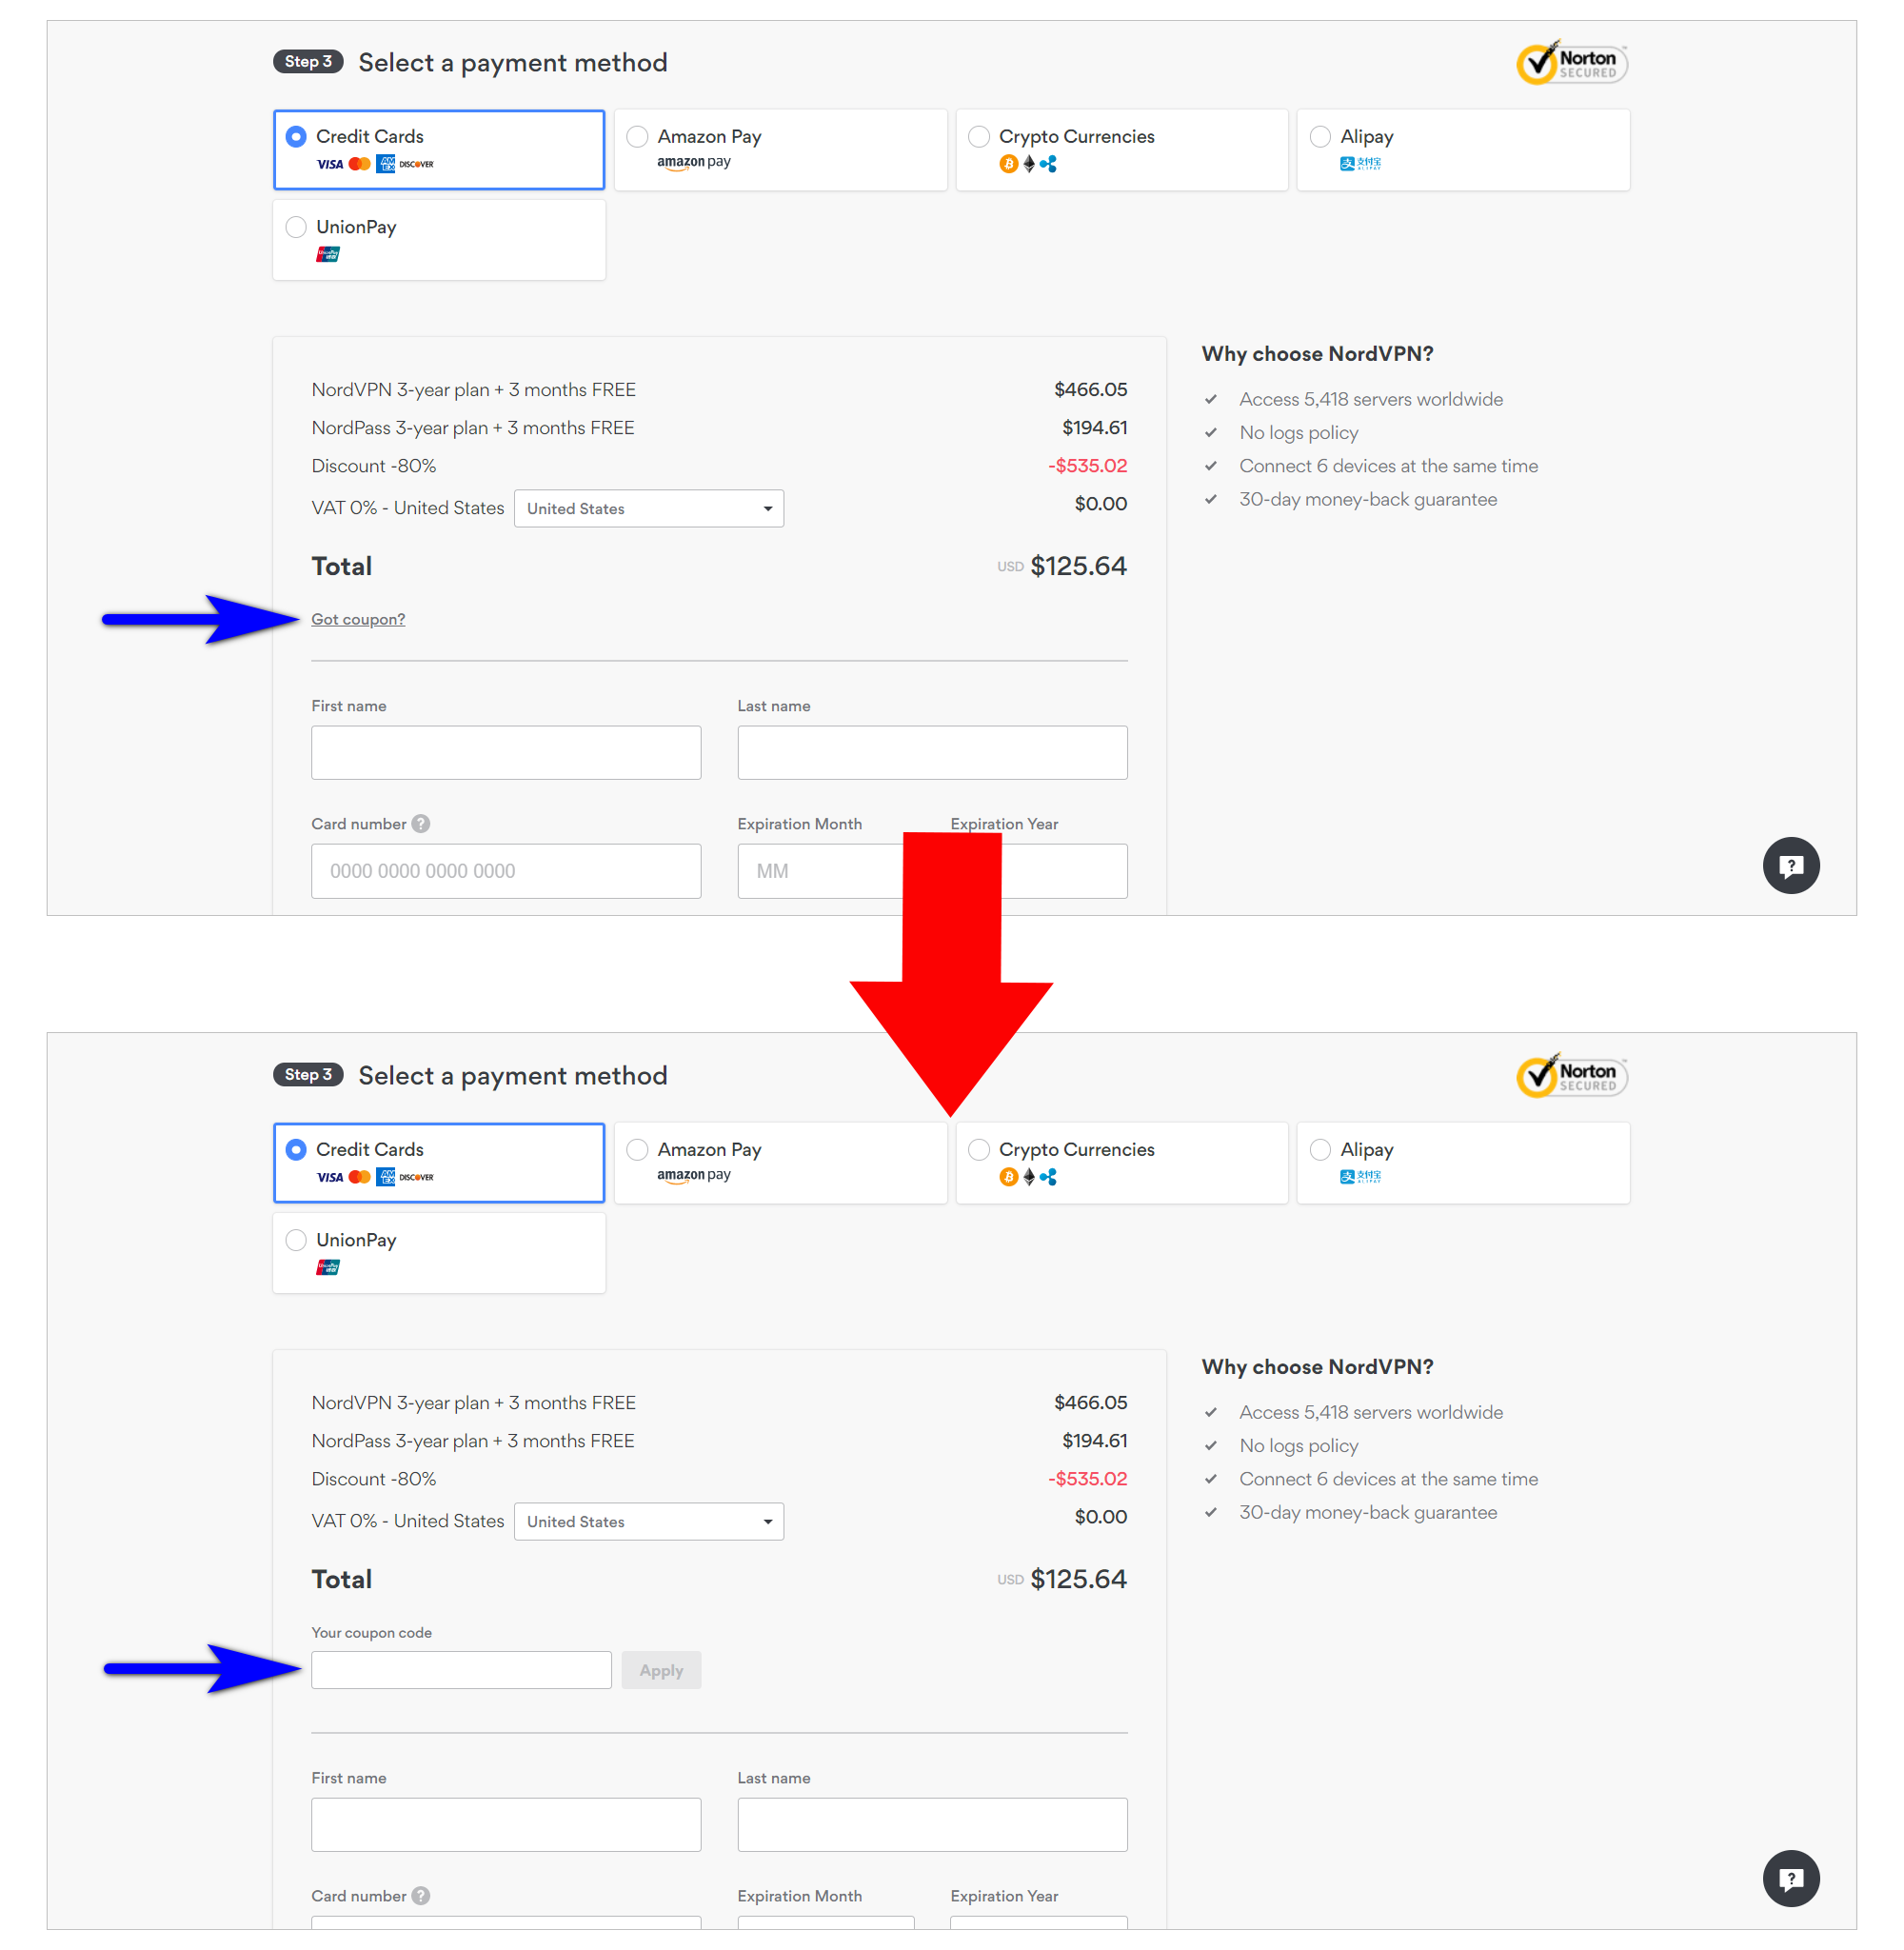 discount pricing strategies - example of de-emphasizing the promo code field. first image shows nordvpn's payment section with an underlined "got coupon?" in small text. second image shows what happens when the text is clicked on - a box titled "your coupon code" is exposed